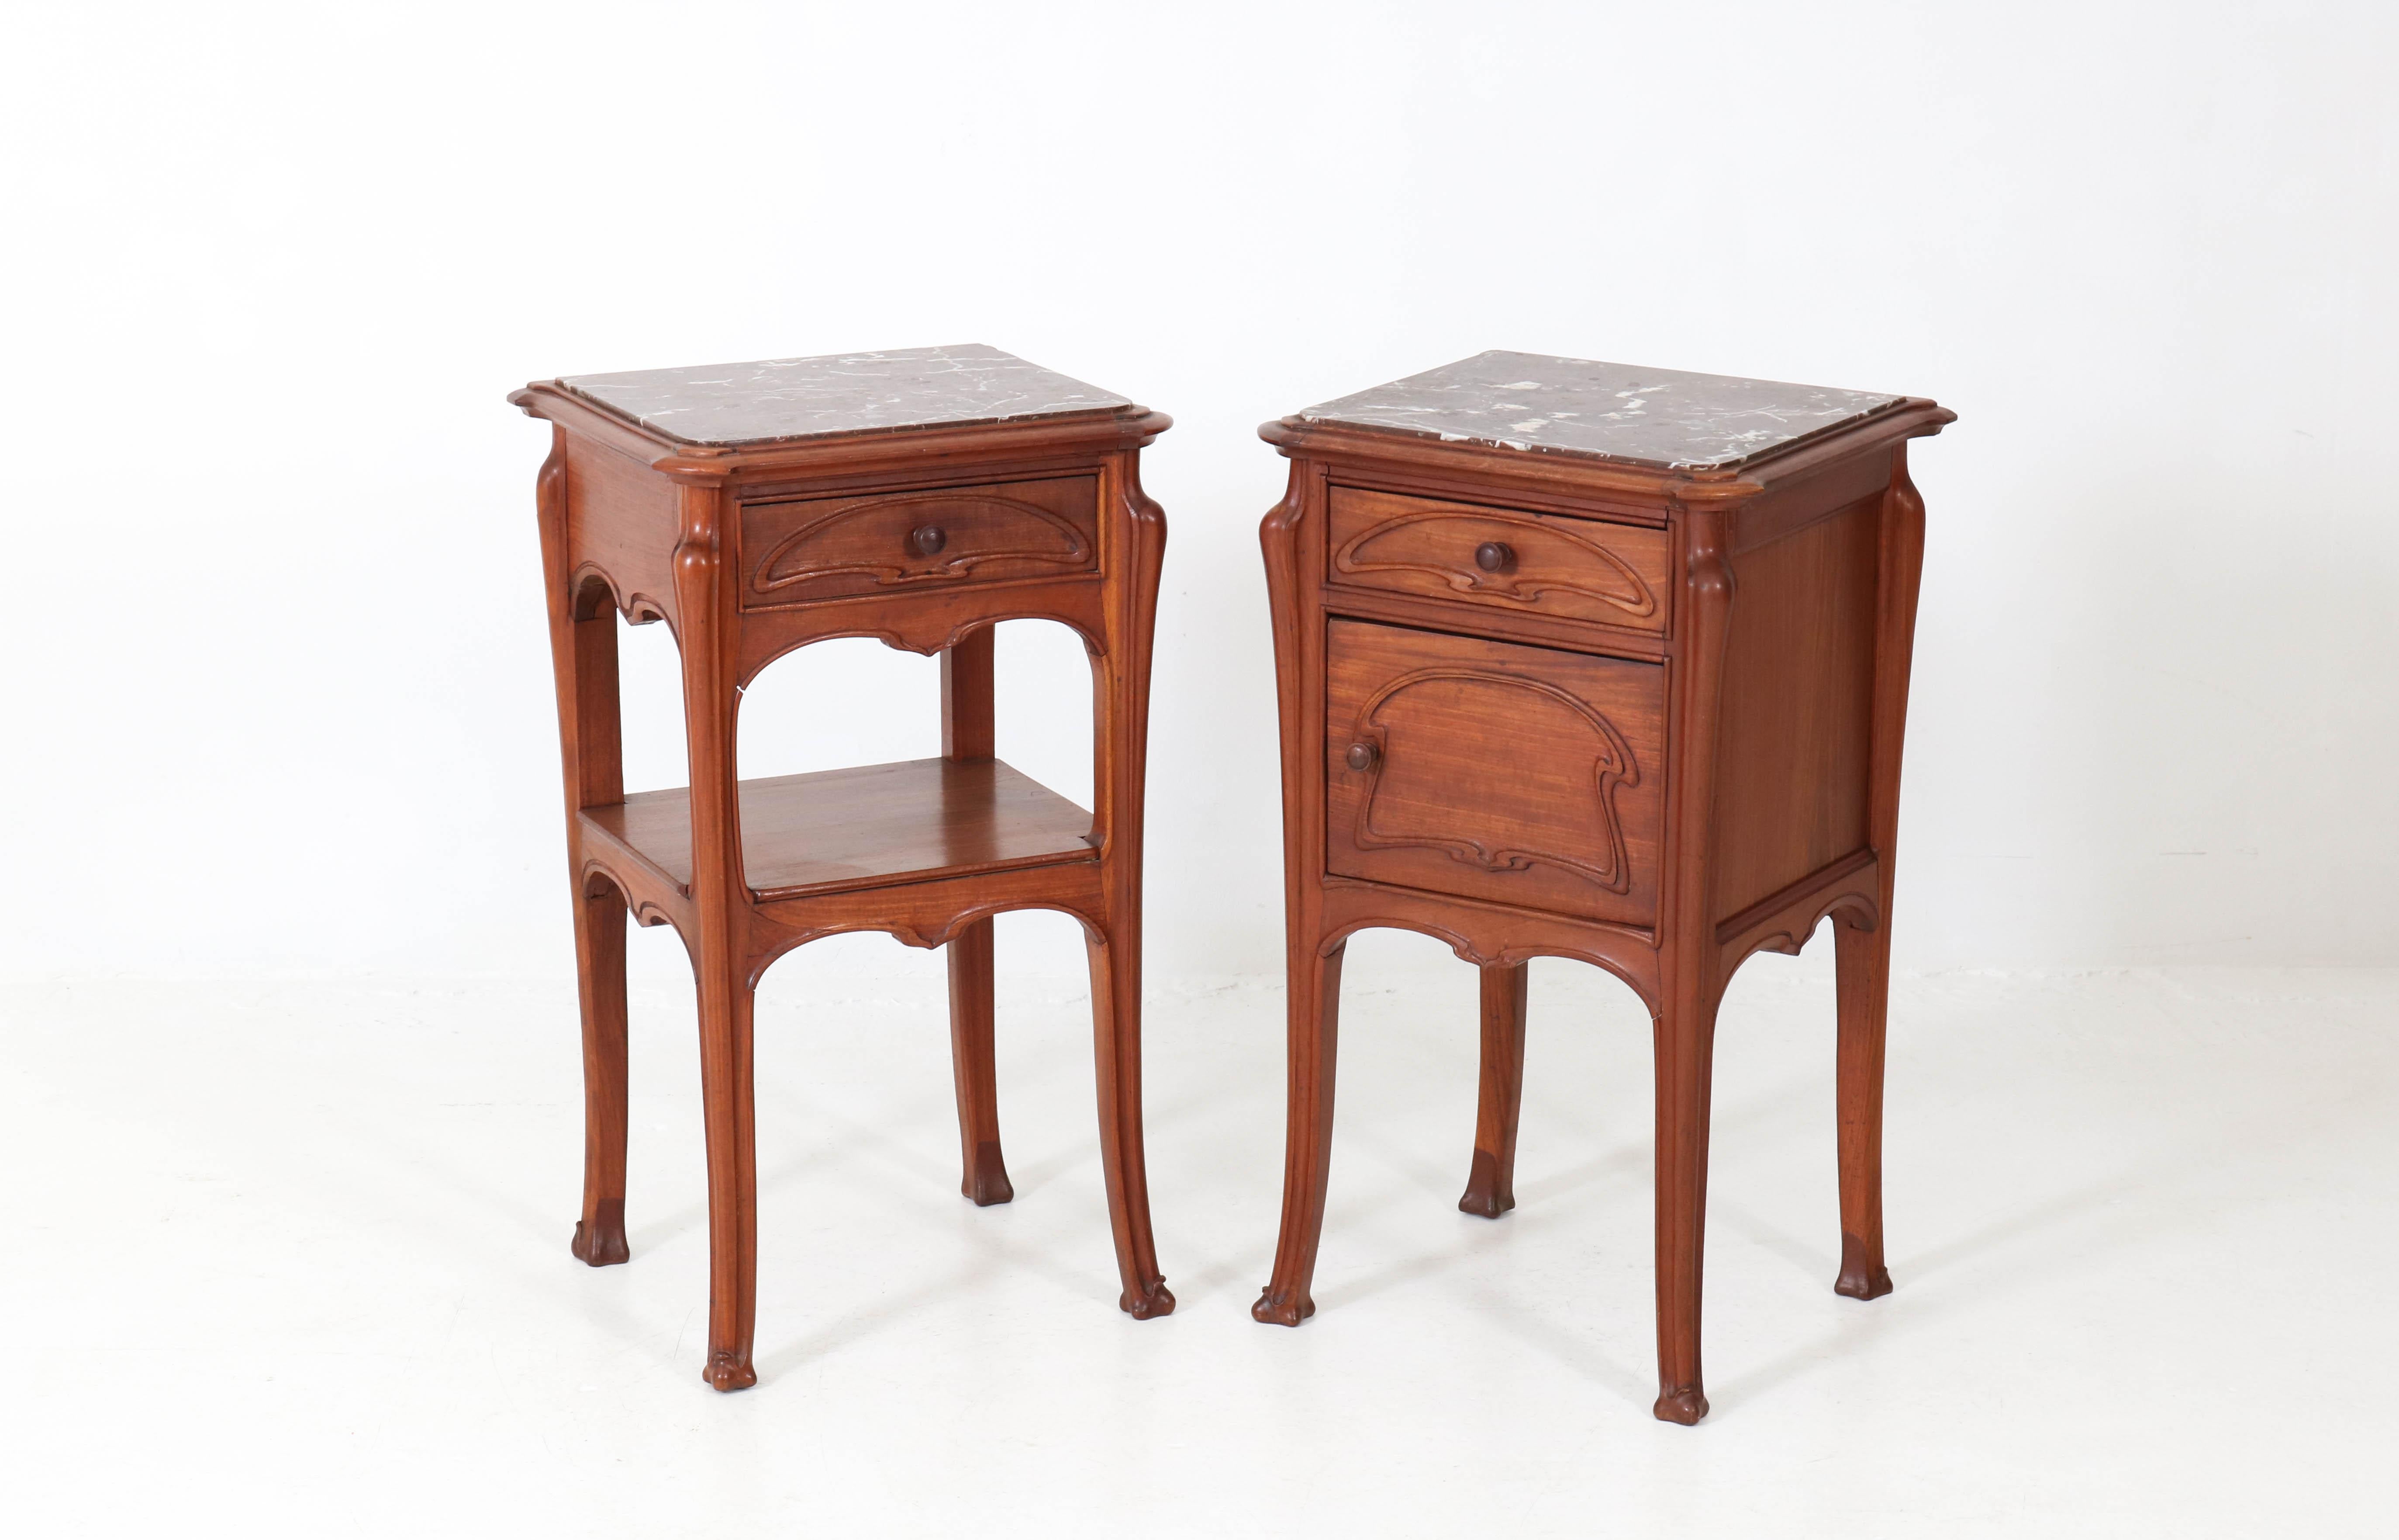 Offered by Amsterdam Modernism:
Elegant pair of French Art Nouveau nightstands or bedside tables.
In the style of Louis Majorelle.
Solid mahogany with original marble tops.
Striking French design from the 1900s.
In good original condition with minor